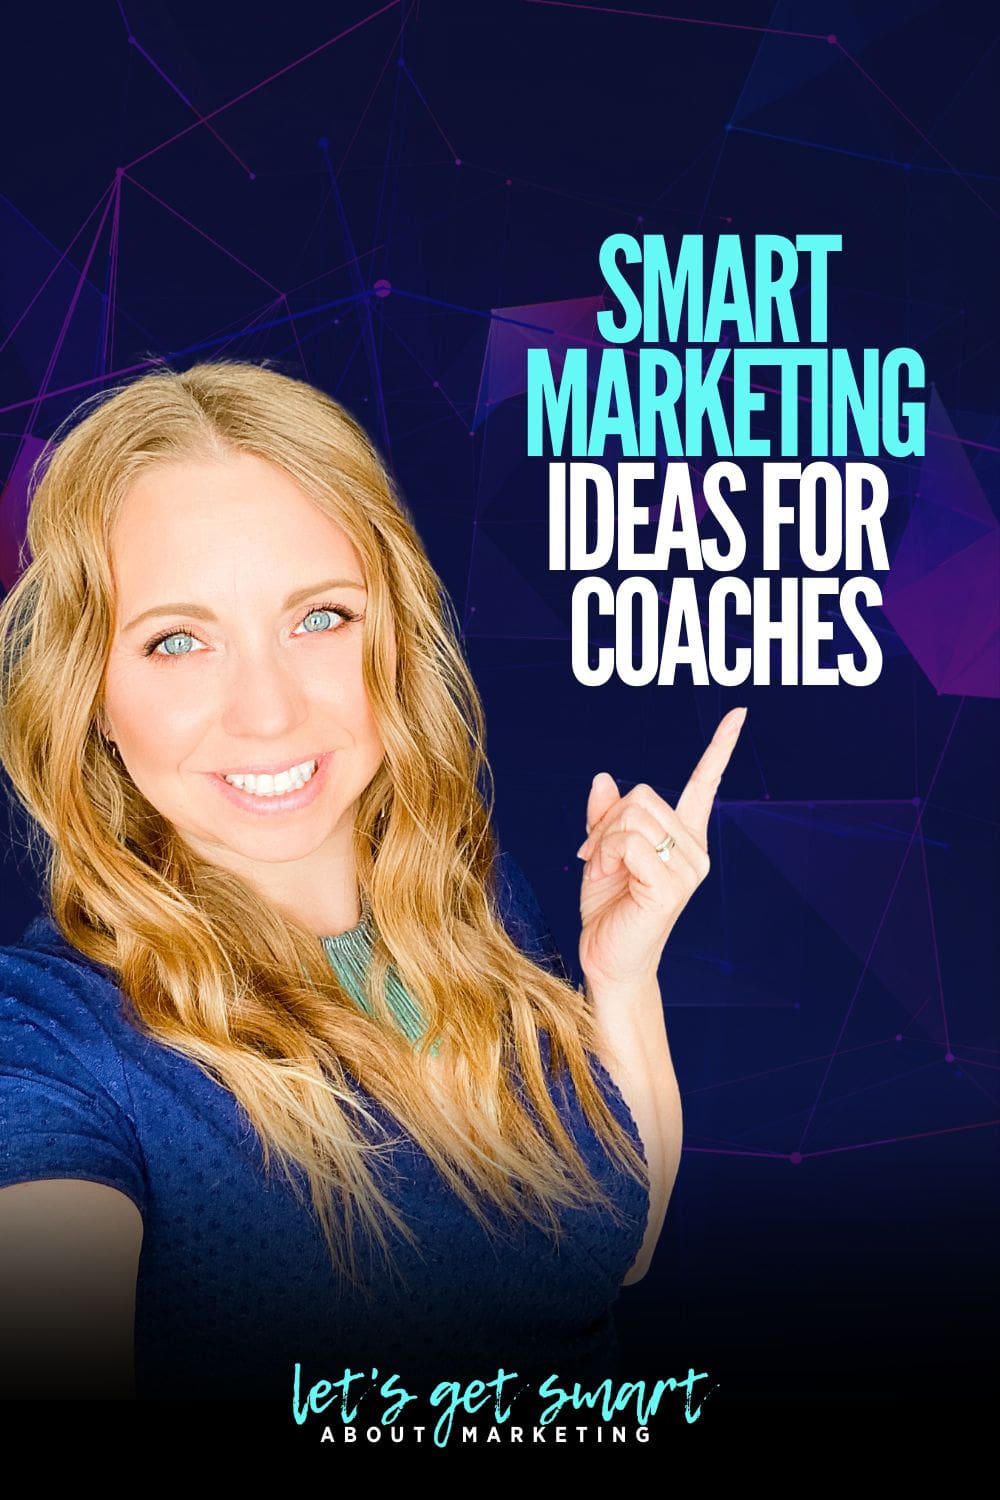 Marketing ideas for Coaches